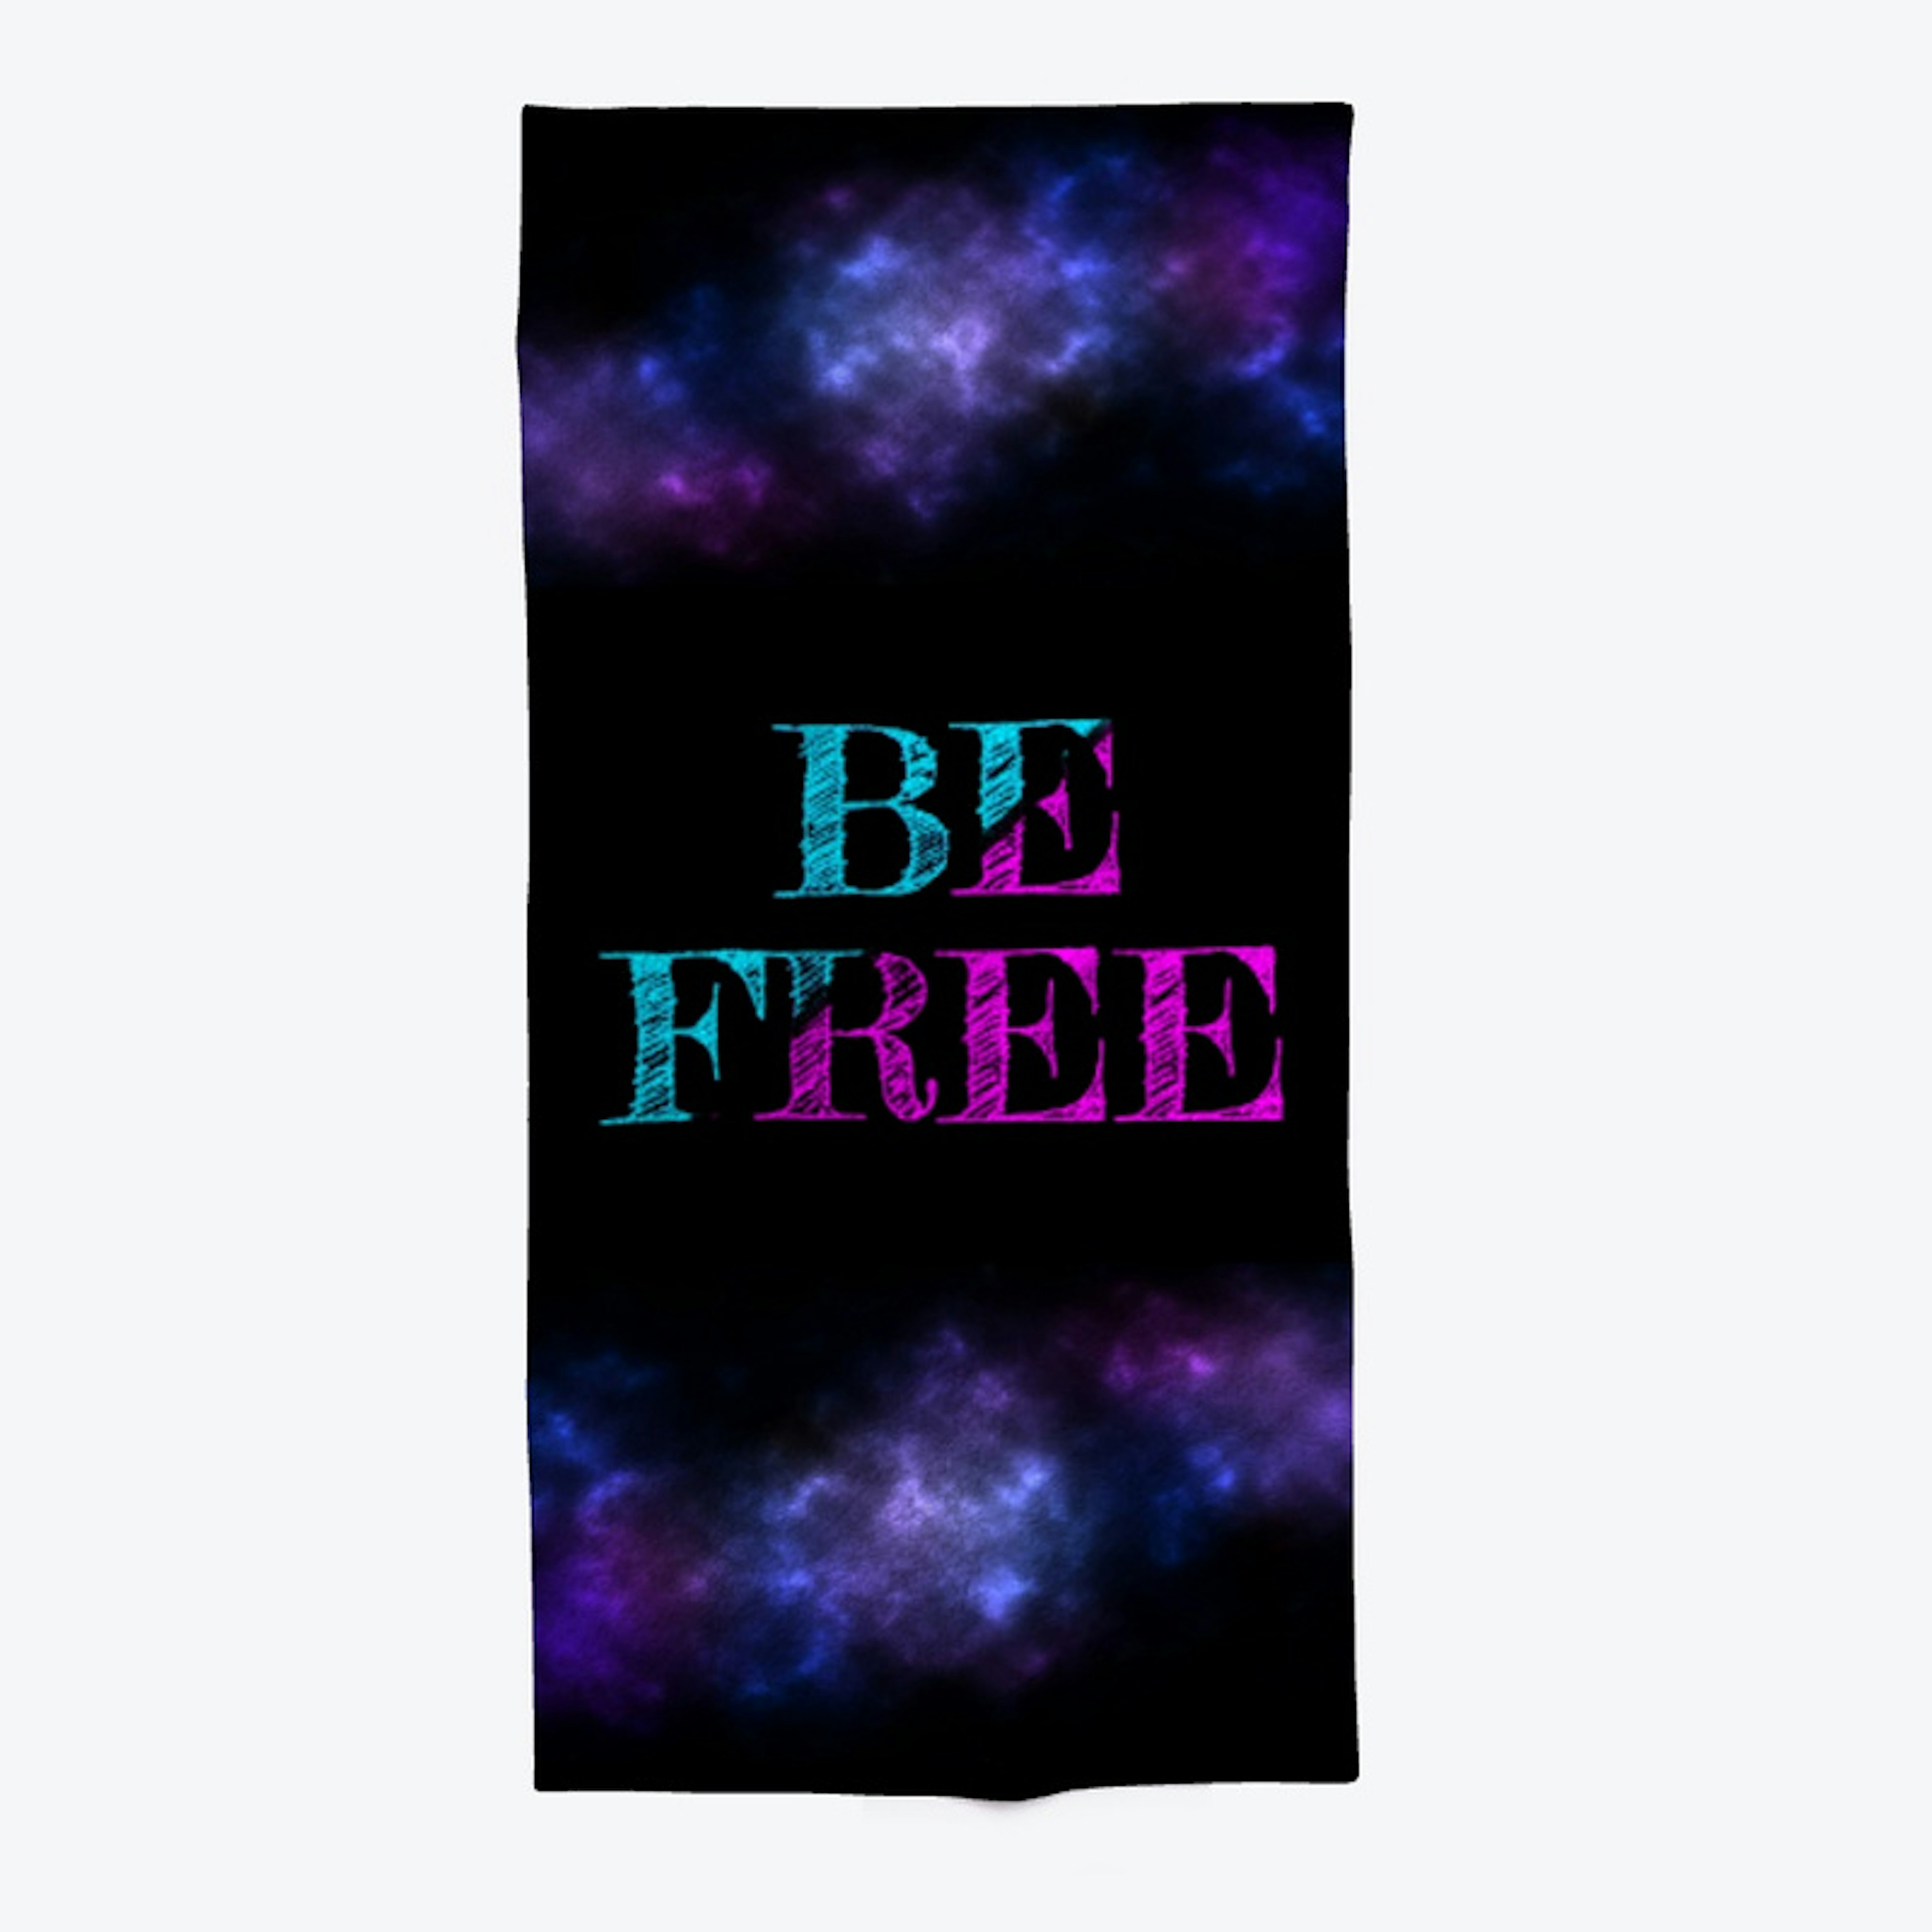 Law of attraction - Be Free